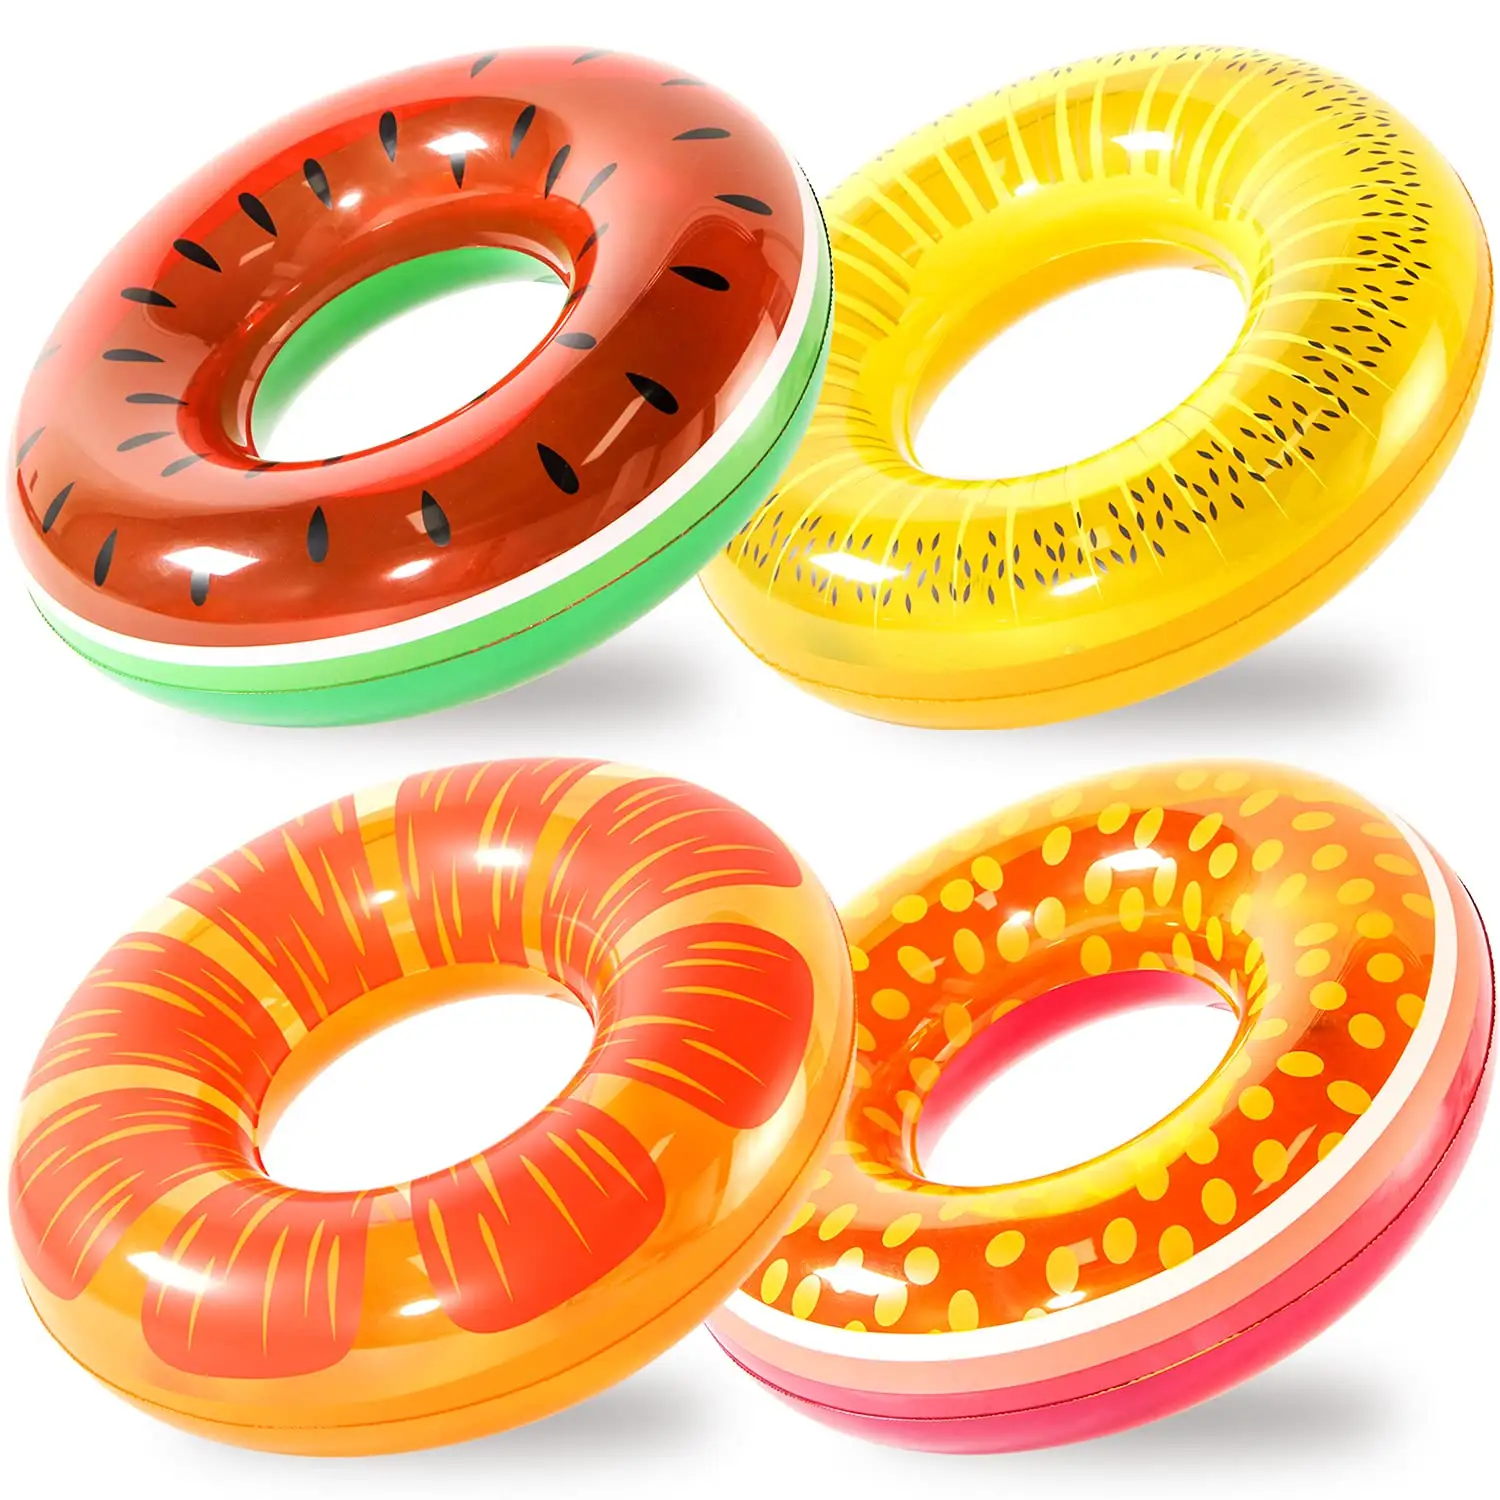 Inflatable Pool Floats 4 Pack Fruit Swim Tubes Rings, Beach Swimming Toys for Kids Adults Fun Water Raft Float Toddlers